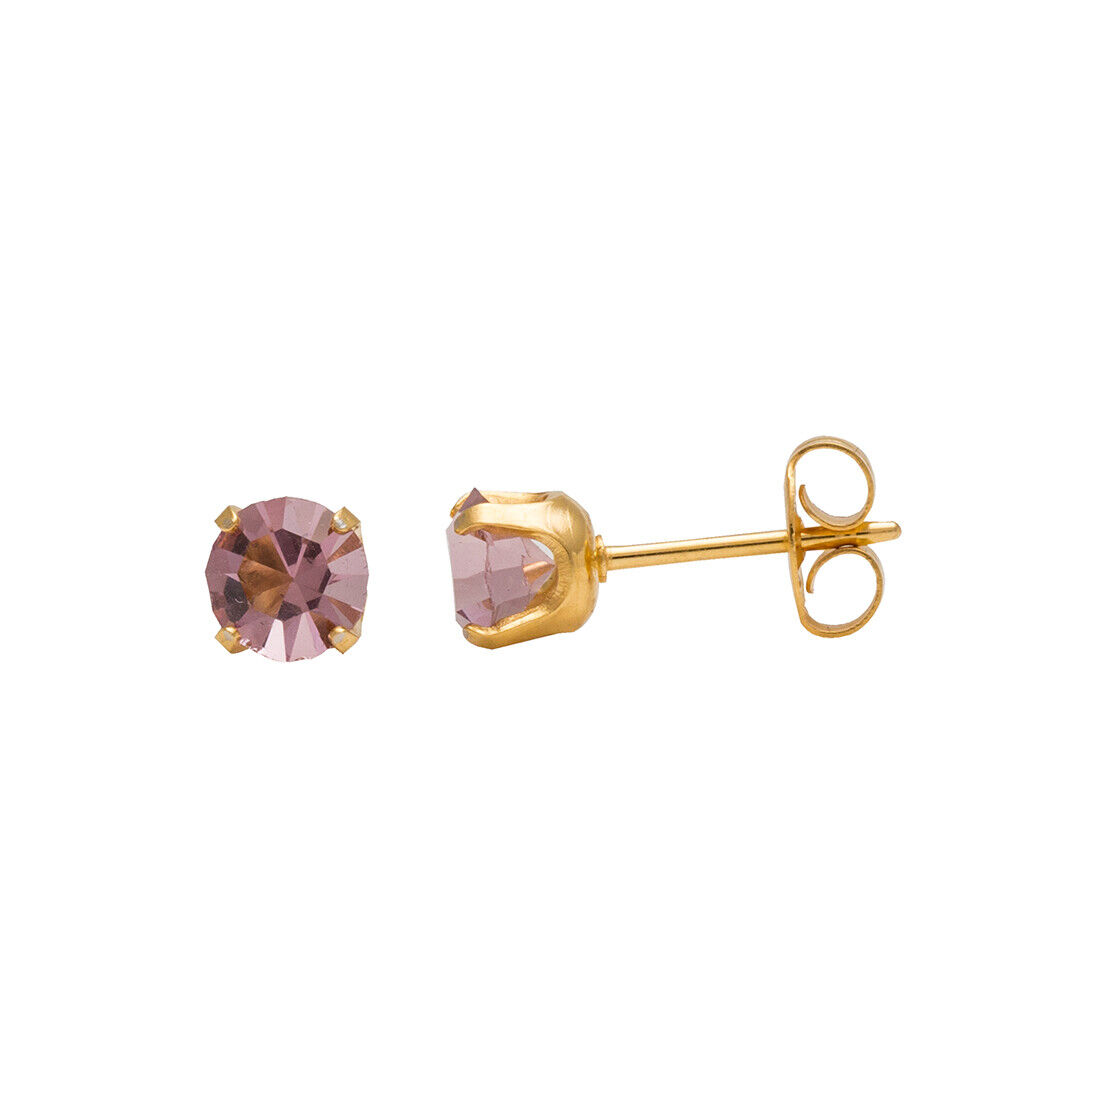 Ear Piercing Earrings Gold Mini Syst Birthstone Factory outlet Luxury goods 